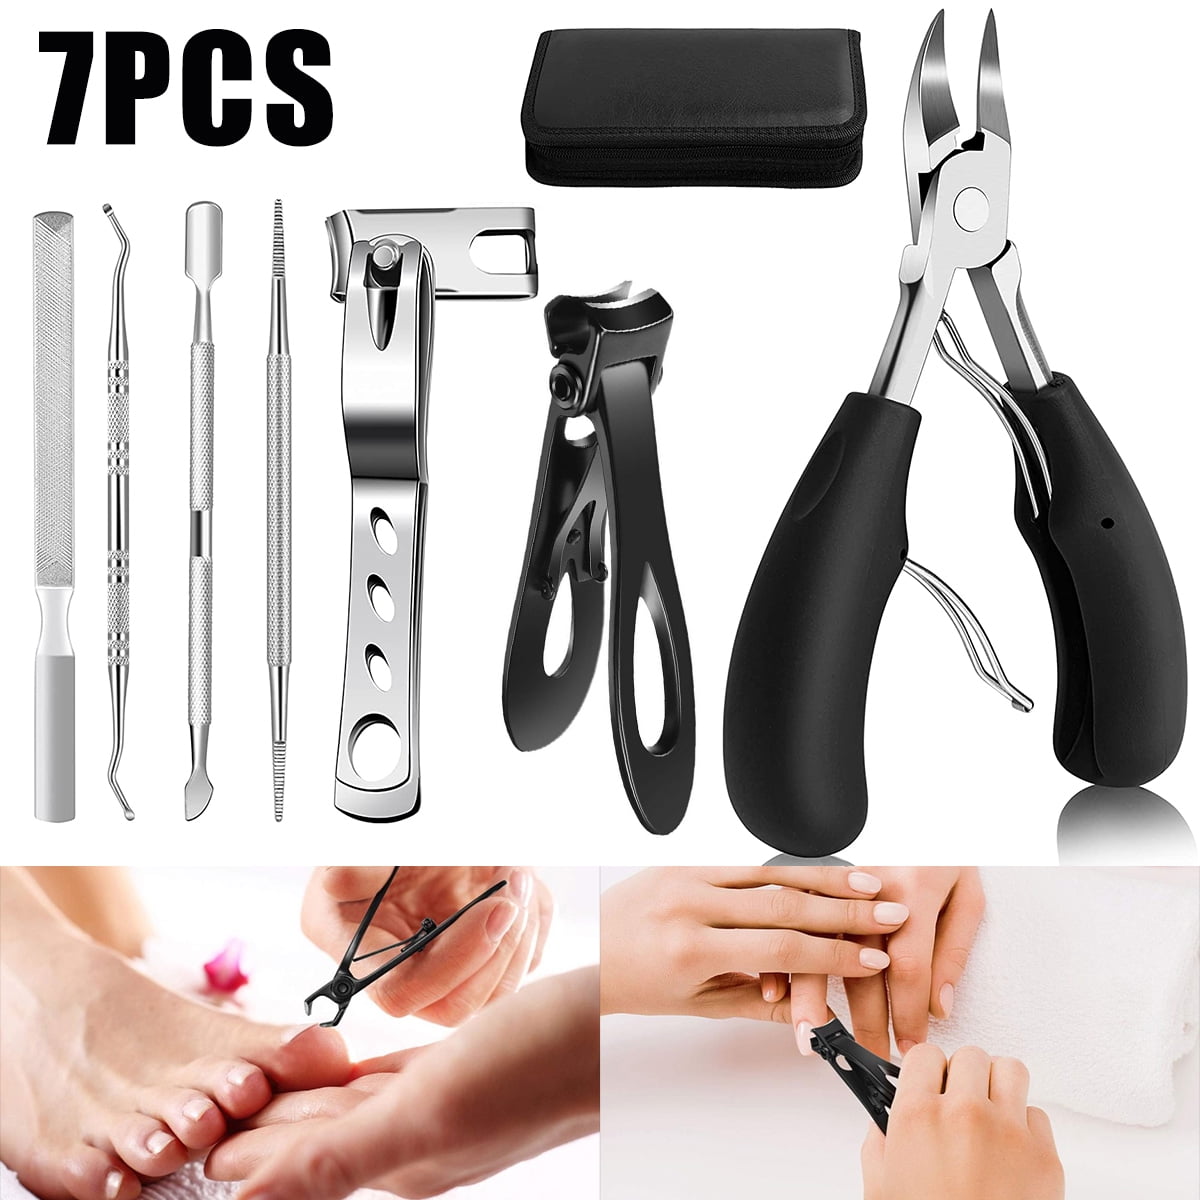 Toenail Clippers for Seniors Thick Toenails, Toe Nail Clippers Set for  Ingrown T